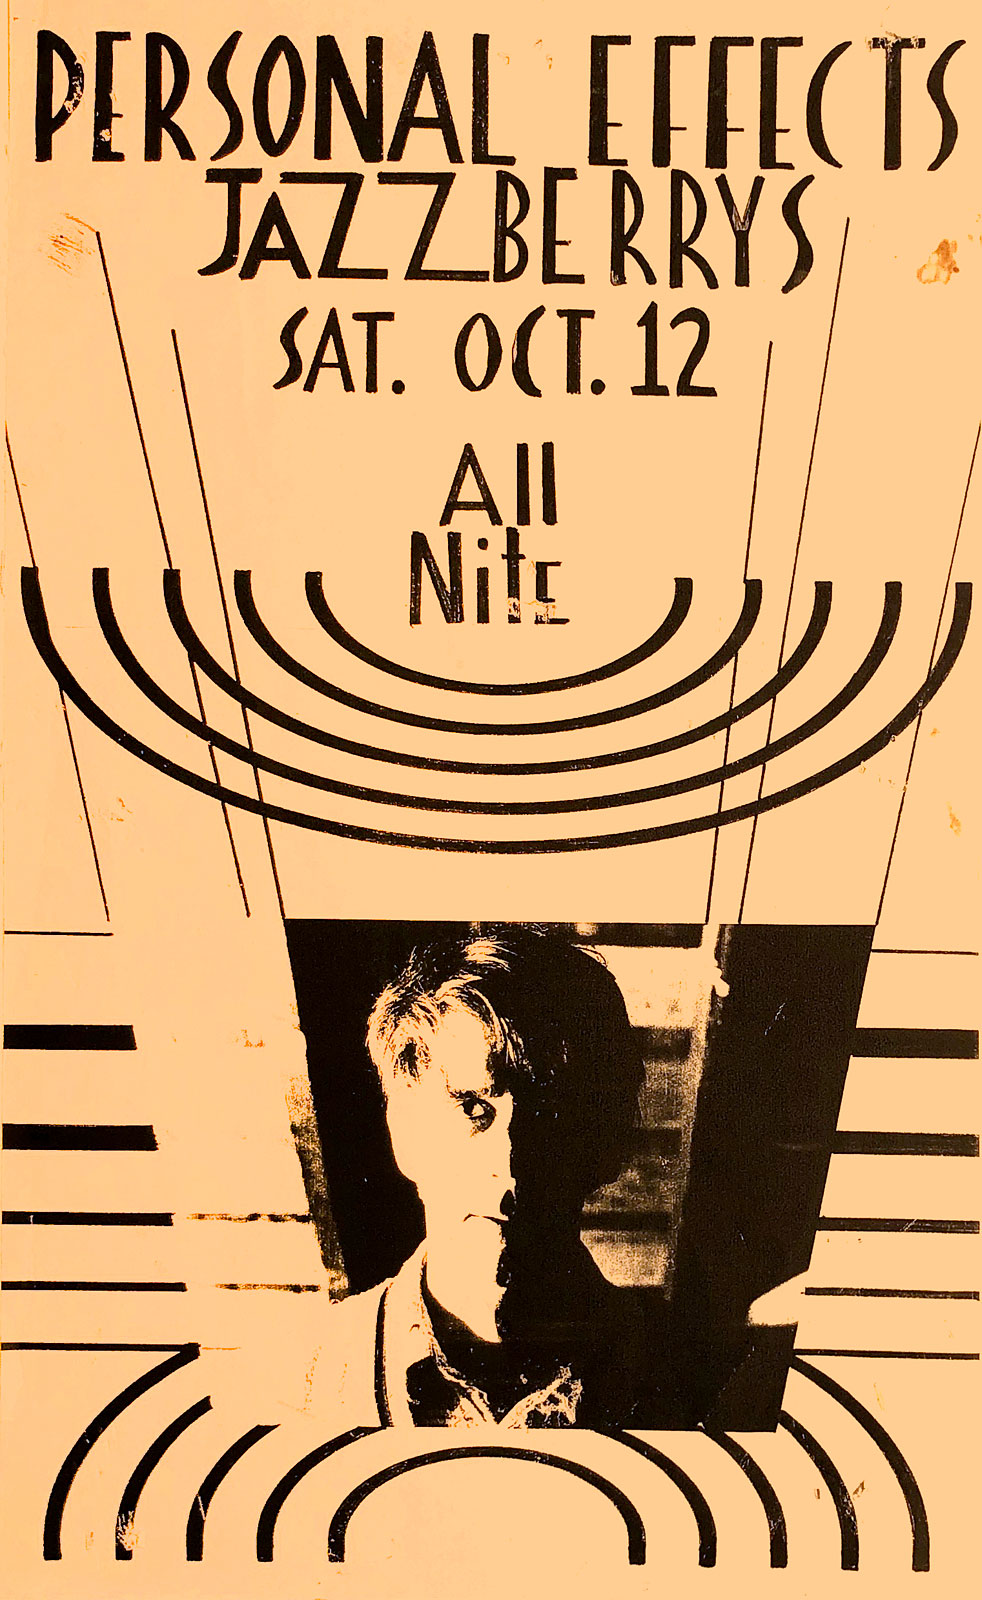 Poster for Personal Effects at Jazzberry's in Rochester, New York on 10.12.1985. Peggi Fournier designed this poster.